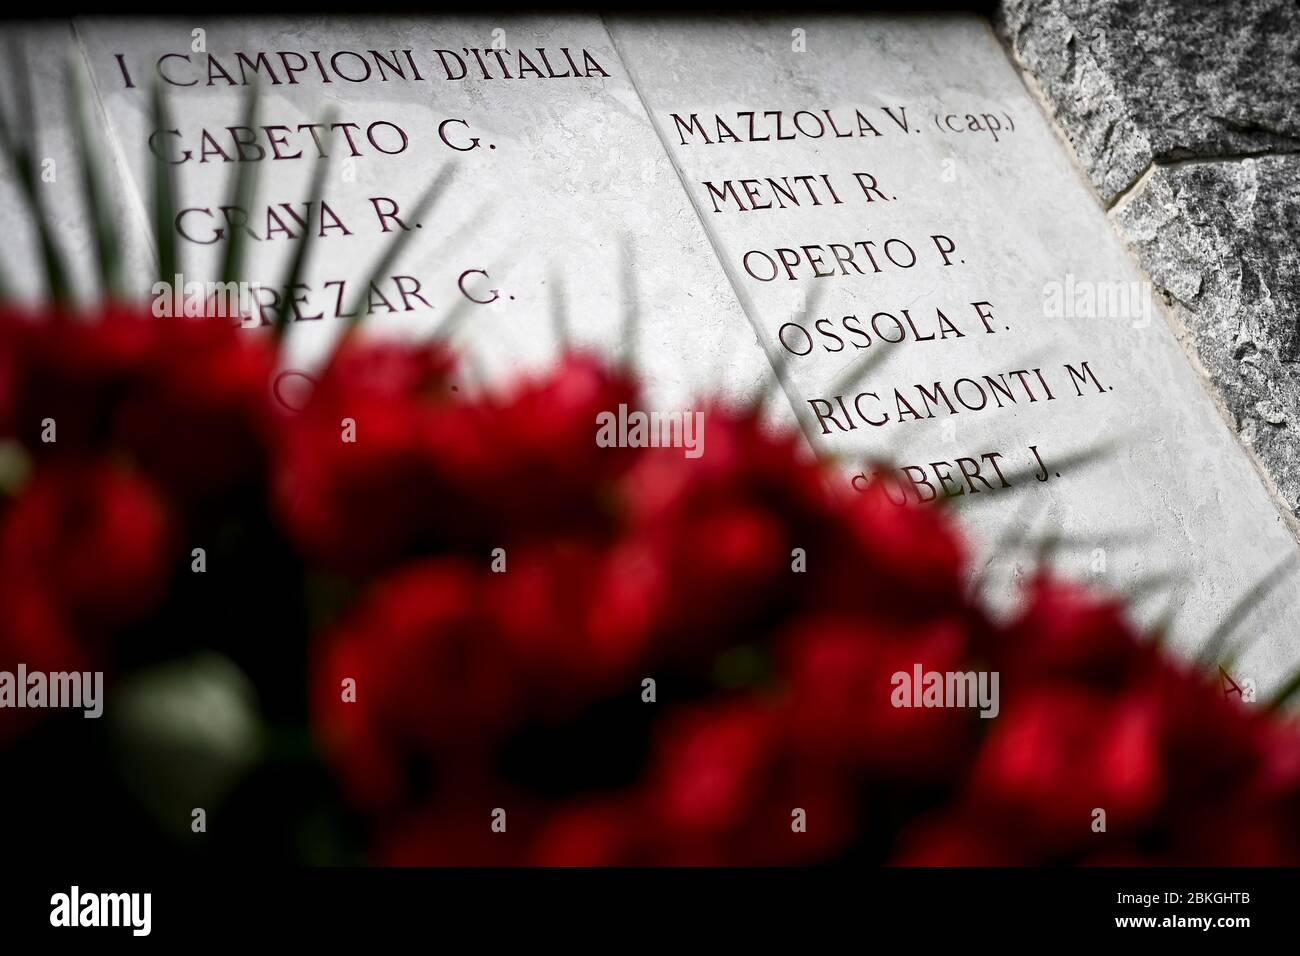 TURIN, ITALY - May 04, 2020: General view shows a detail of the monument dedicated to commemorate the Superga tragedy with names of some players died in the air disaster. On May 4, 1949, an airplane carrying the Grande Torino football team from Lisbon to Turin crashed into a wall of the Basilica of Superga over a hill near Turin killing members of the team. The 71th Annual commemoration of the Superga tragedy is celebrated respecting restrictions imposed by Italian government due COVID-19 coronavirus crisis. Credit: Sipa USA/Alamy Live News Stock Photo